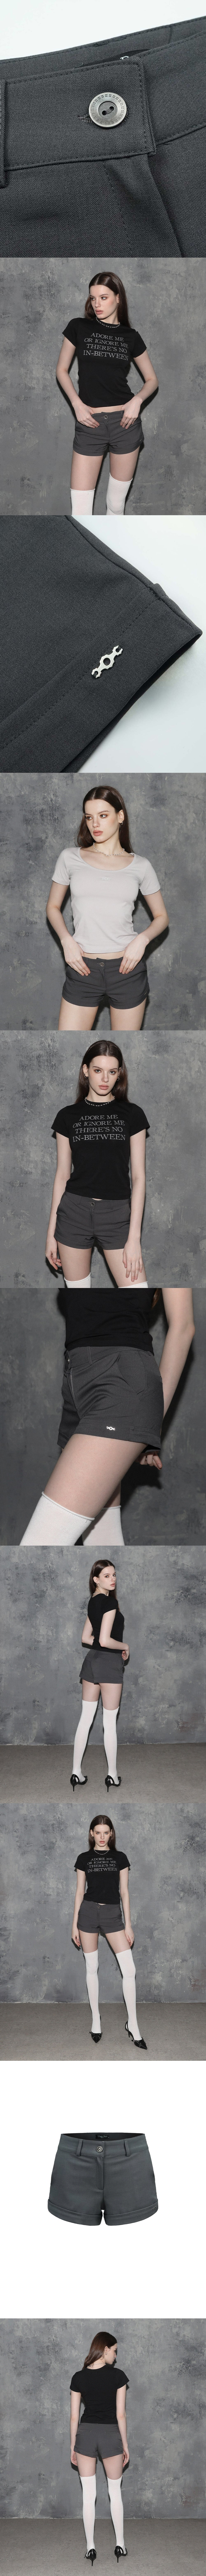 Metal triclipse tailored mini shorts charcoal